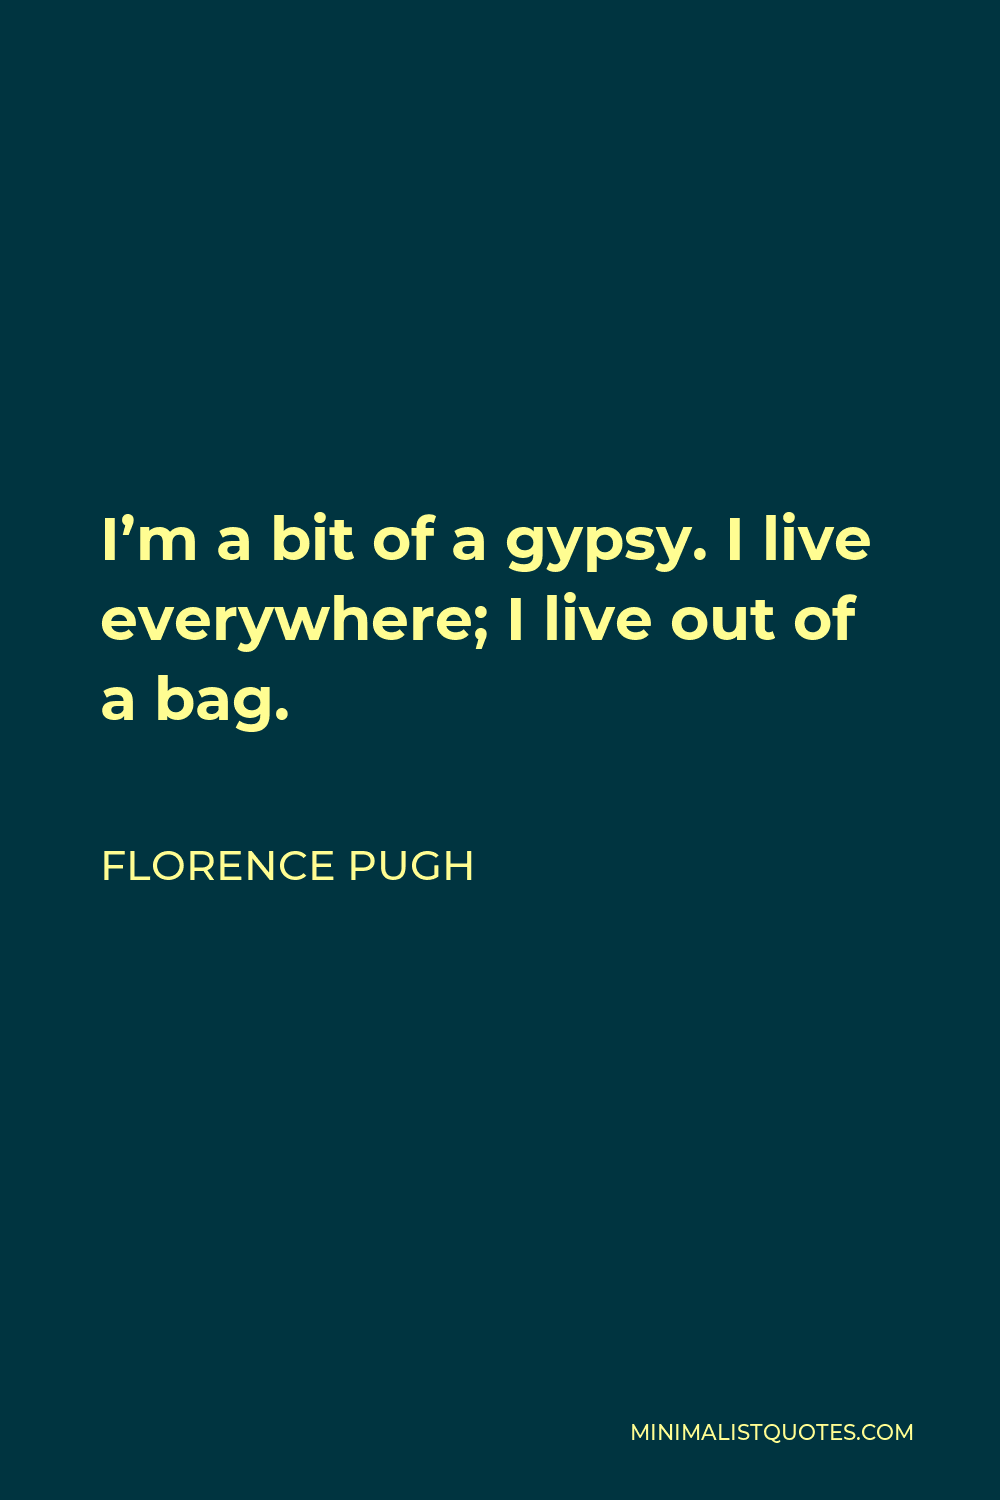 Florence Pugh Quote - I’m a bit of a gypsy. I live everywhere; I live out of a bag.